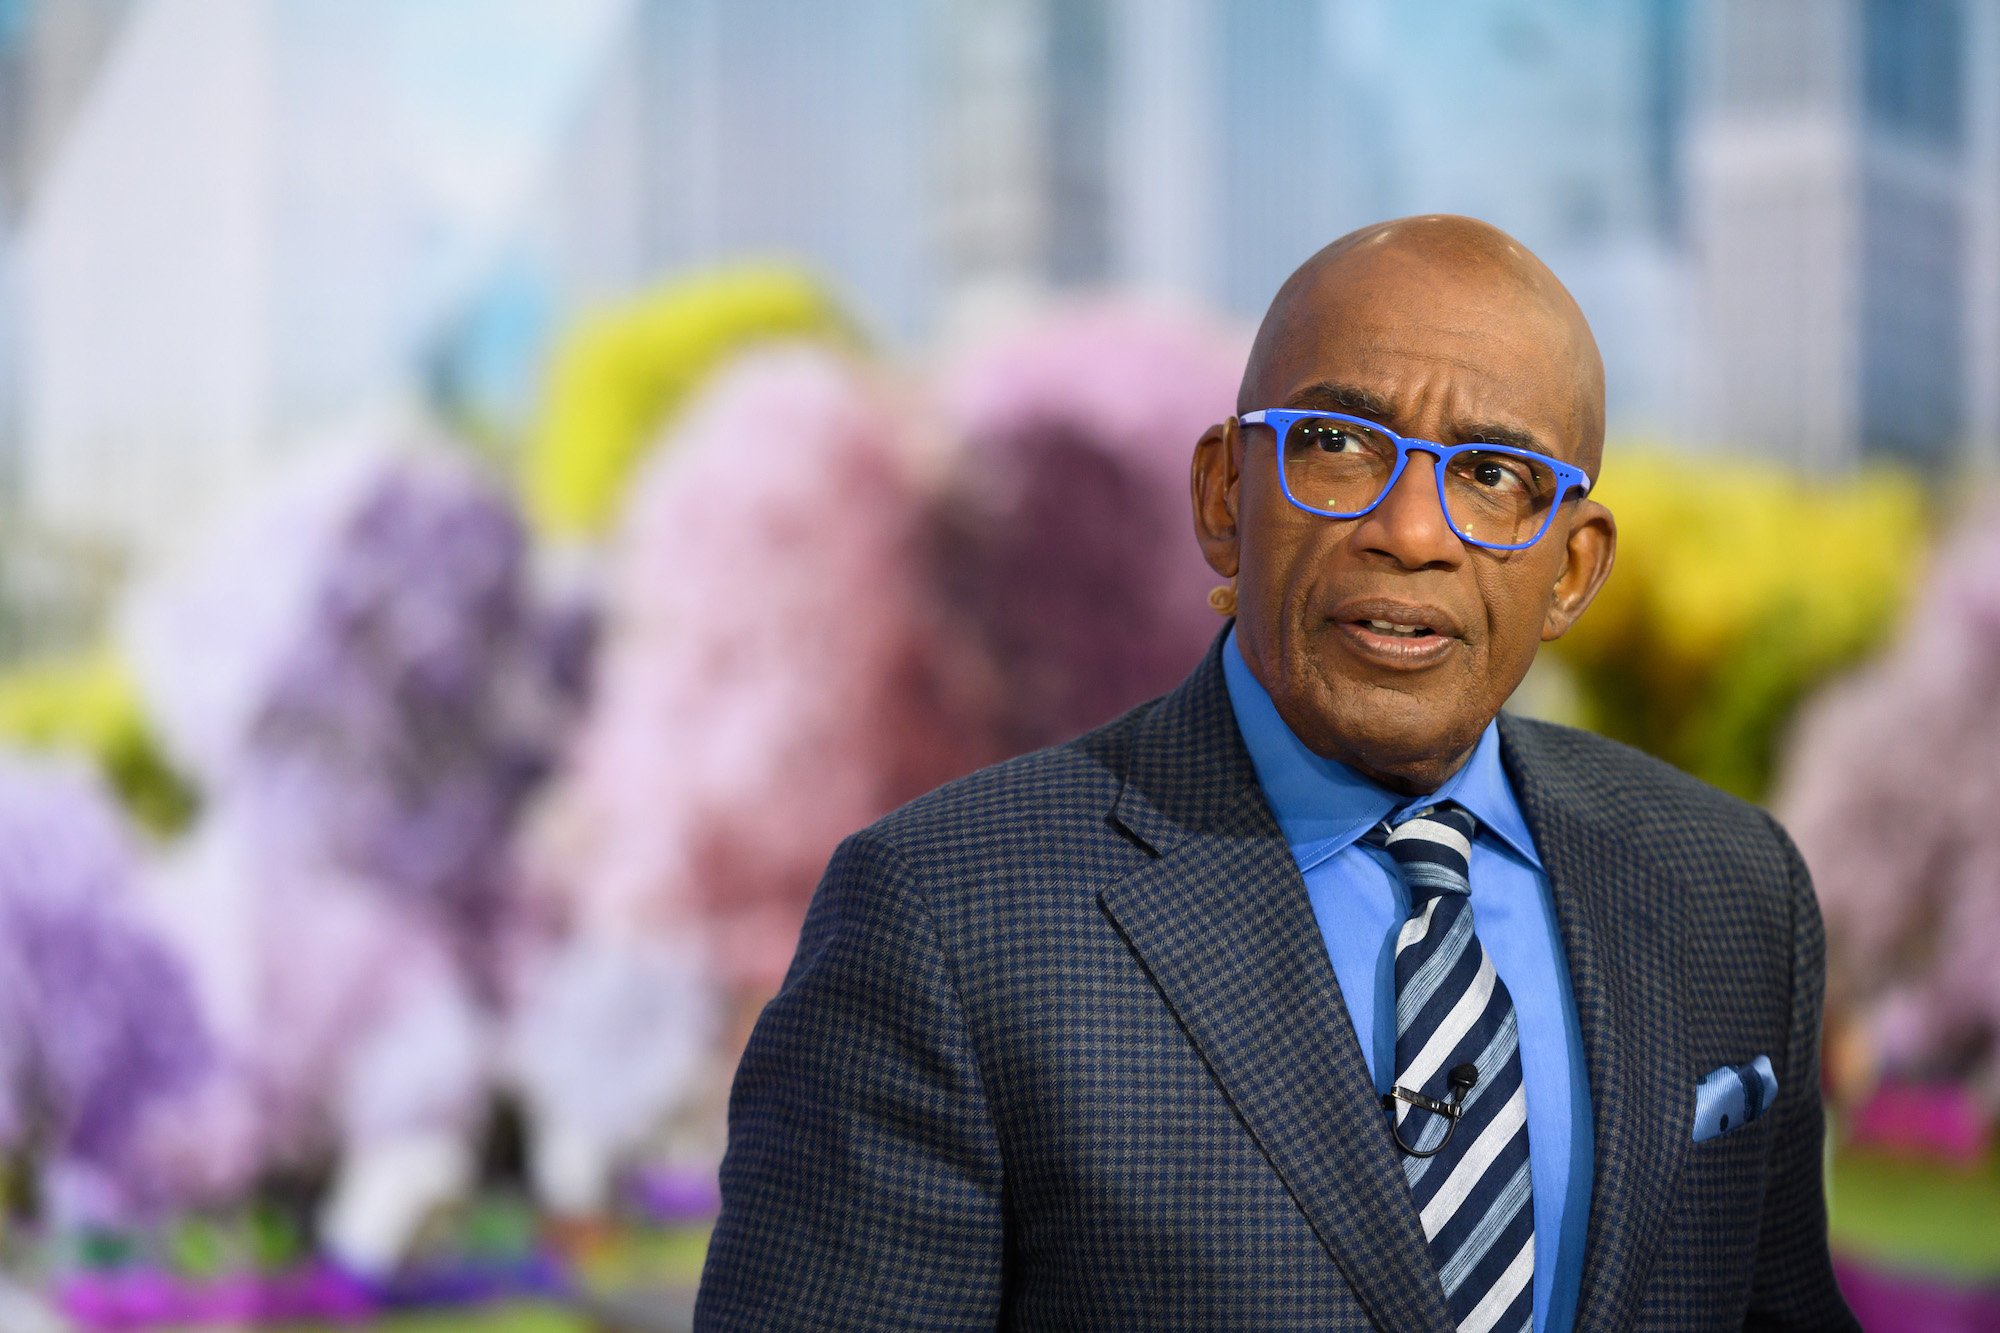 Al Roker looking off to the side in front of a blurred background